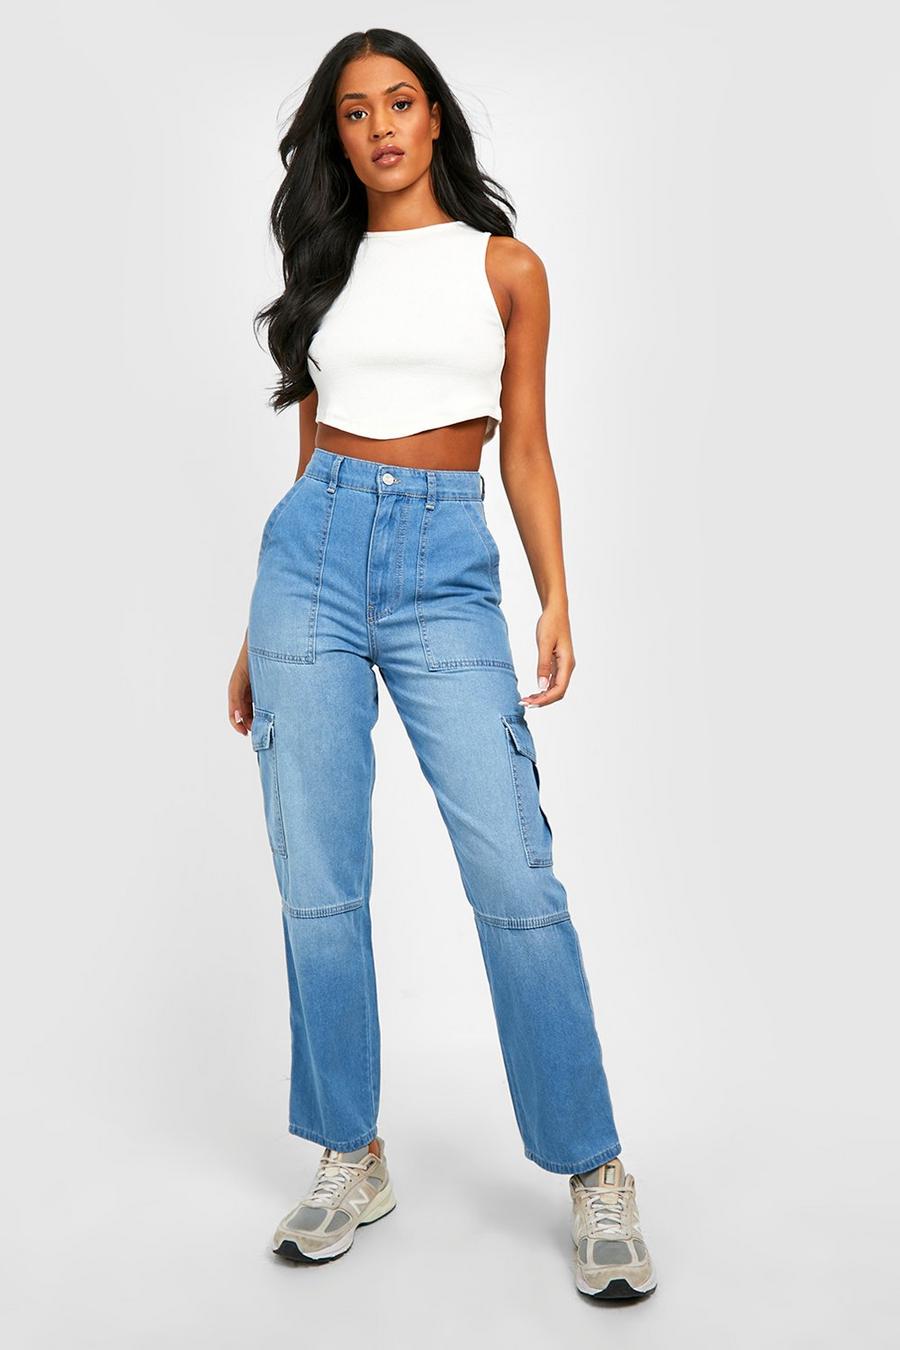 Tall Jeans | Tall Mom Jeans and Tall Jeggings | boohoo UK